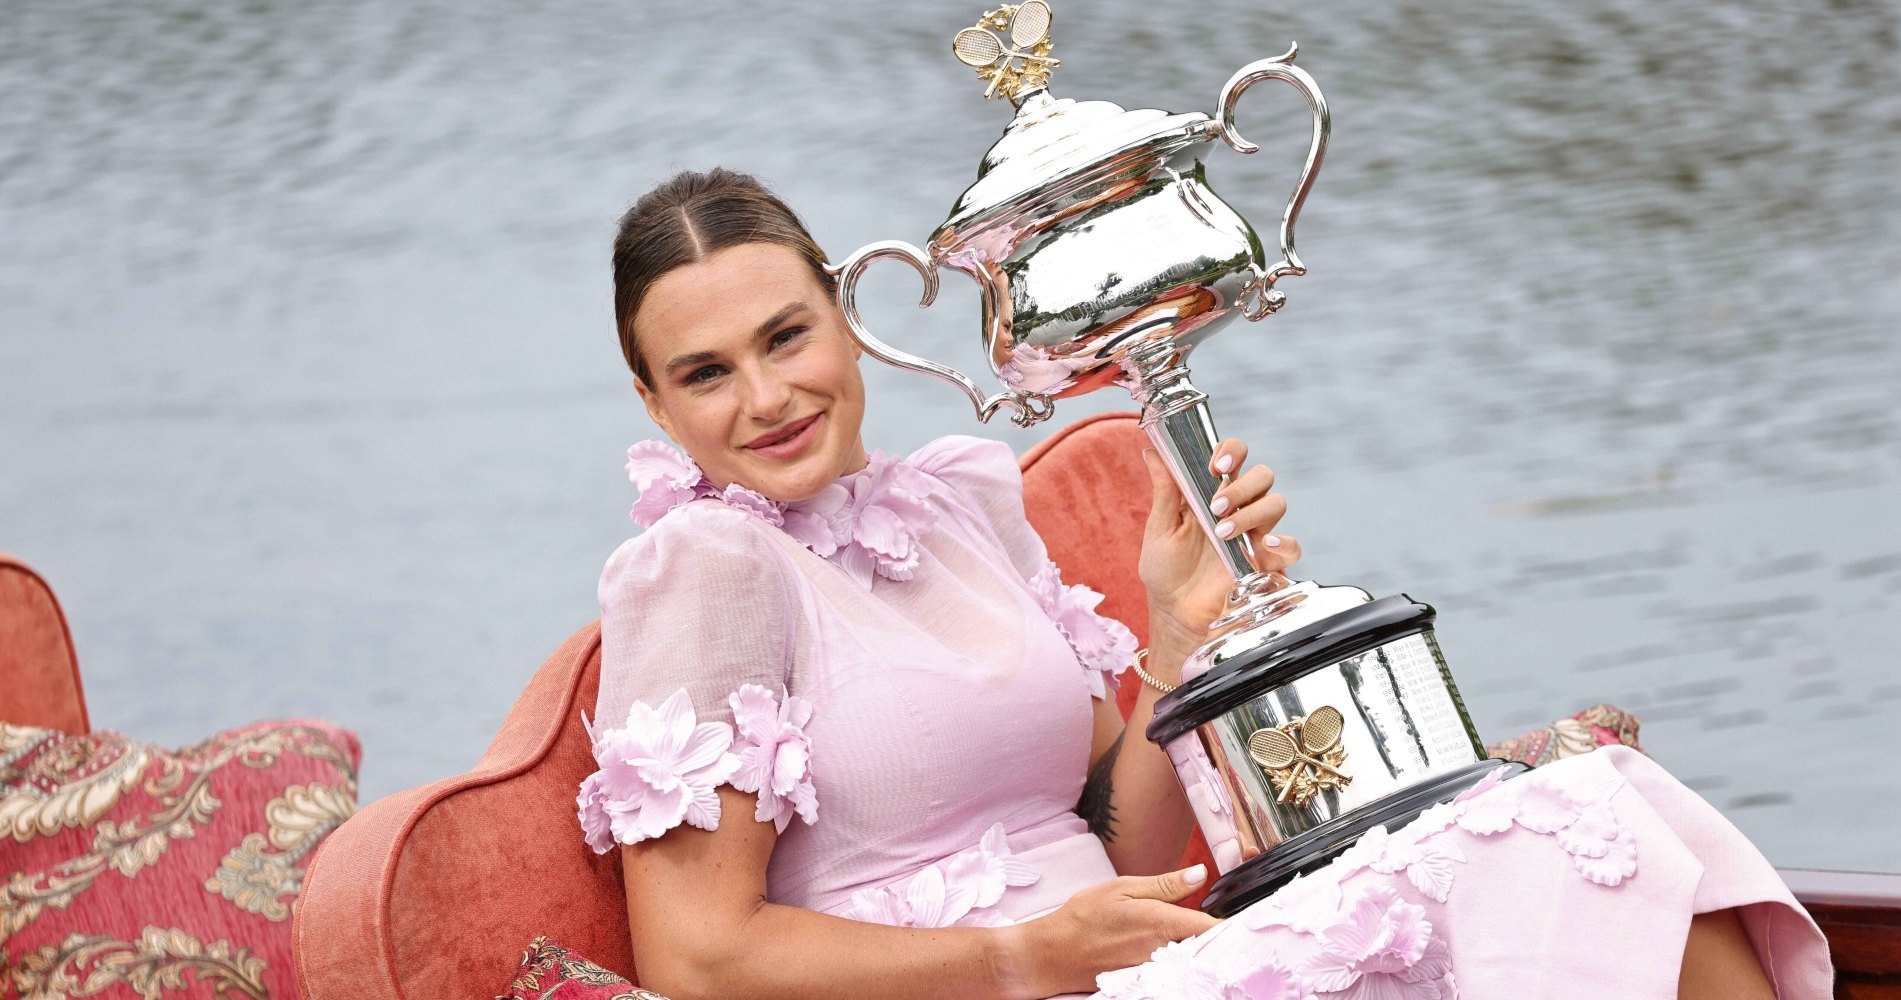 Everything you always wanted to know about Aryna Sabalenka